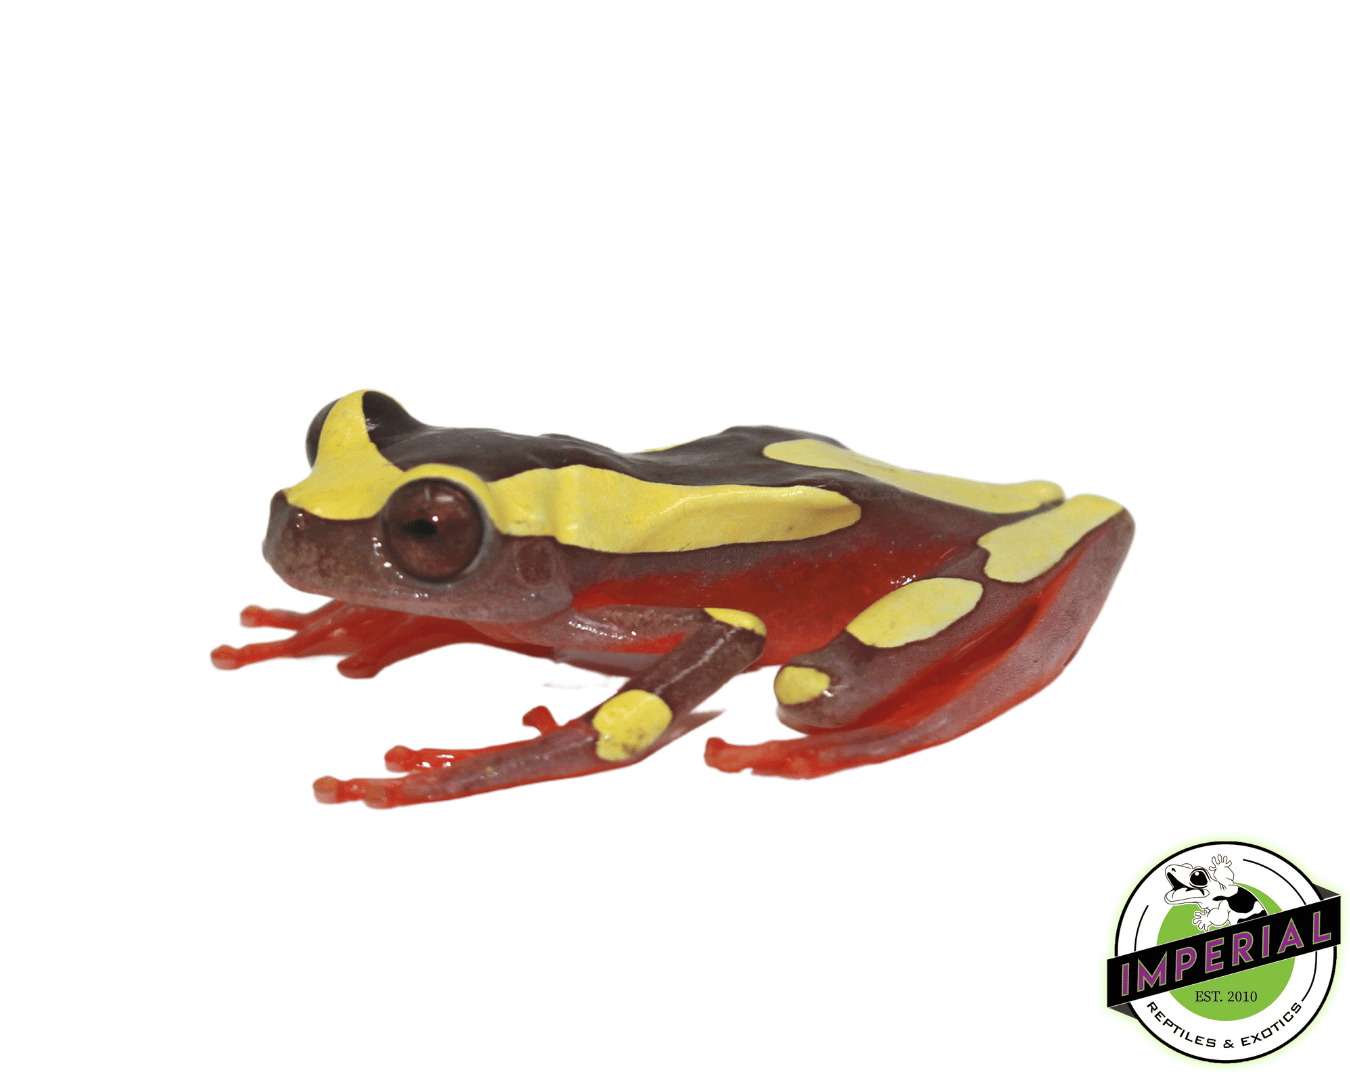 clown tree frog for sale, buy amphibians online at cheap prices